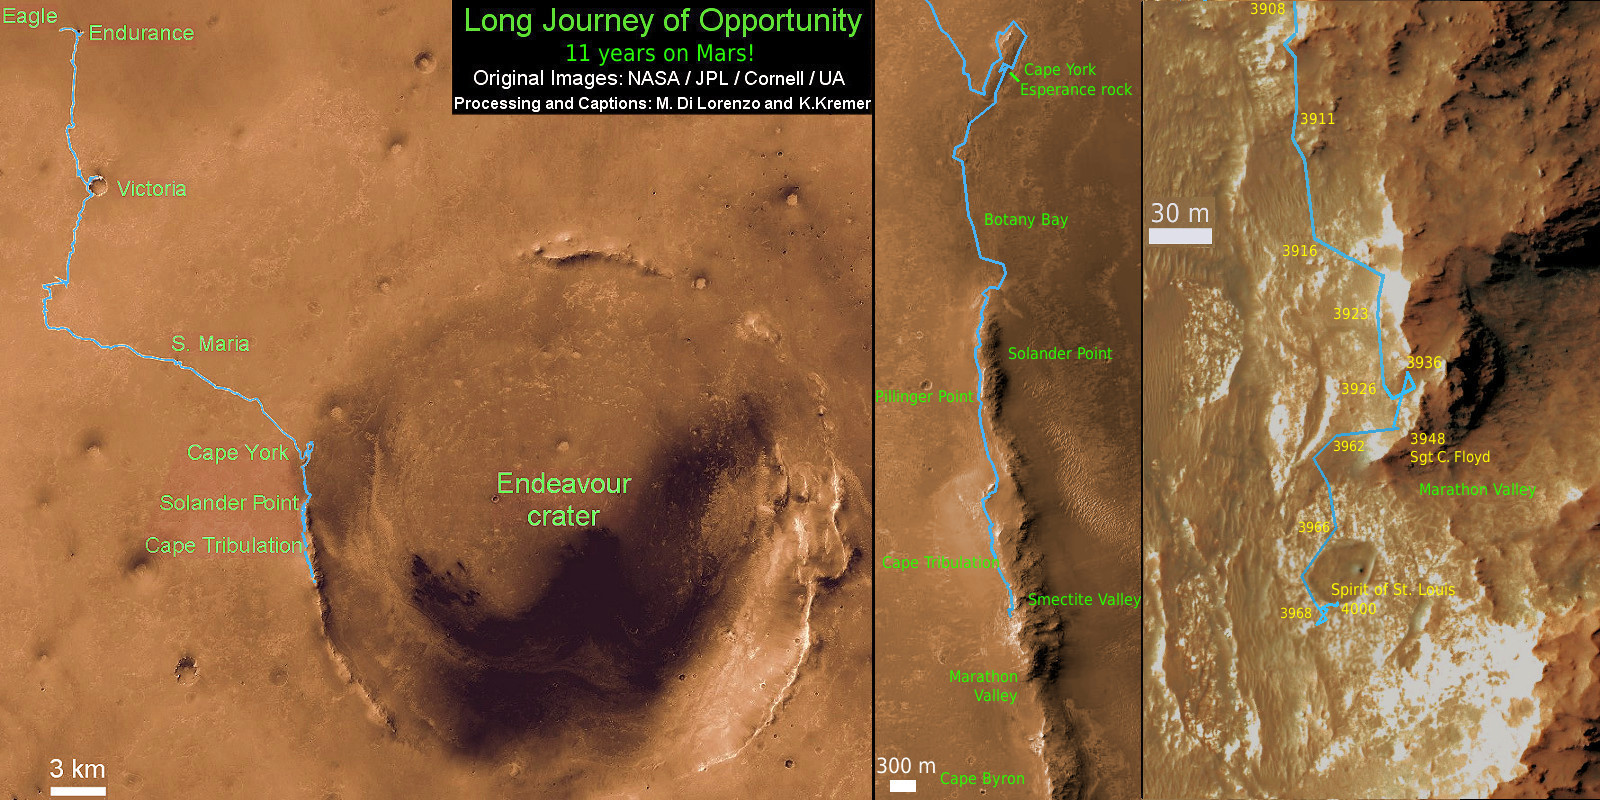 11 Year Traverse Map for NASA’s Opportunity rover from 2004 to 2015. This map shows the entire path the rover has driven during 11 years and three months and a marathon runners distance on Mars for over 4000 Sols, or Martian days, since landing inside Eagle Crater on Jan 24, 2004 -to current location just past the Cape Tribulation summit at the western rim of Endeavour Crater at Marathon Valley. Rover surpassed Marathon distance on Sol 3968 and marked 11th Martian anniversary on Sol 3911. Opportunity discovered clay minerals at Esperance – indicative of a habitable zone - and is searching for more on the road ahead at Marathon Valley.  Credit: NASA/JPL/Cornell/ASU/Marco Di Lorenzo/Ken Kremer – kenkremer.com